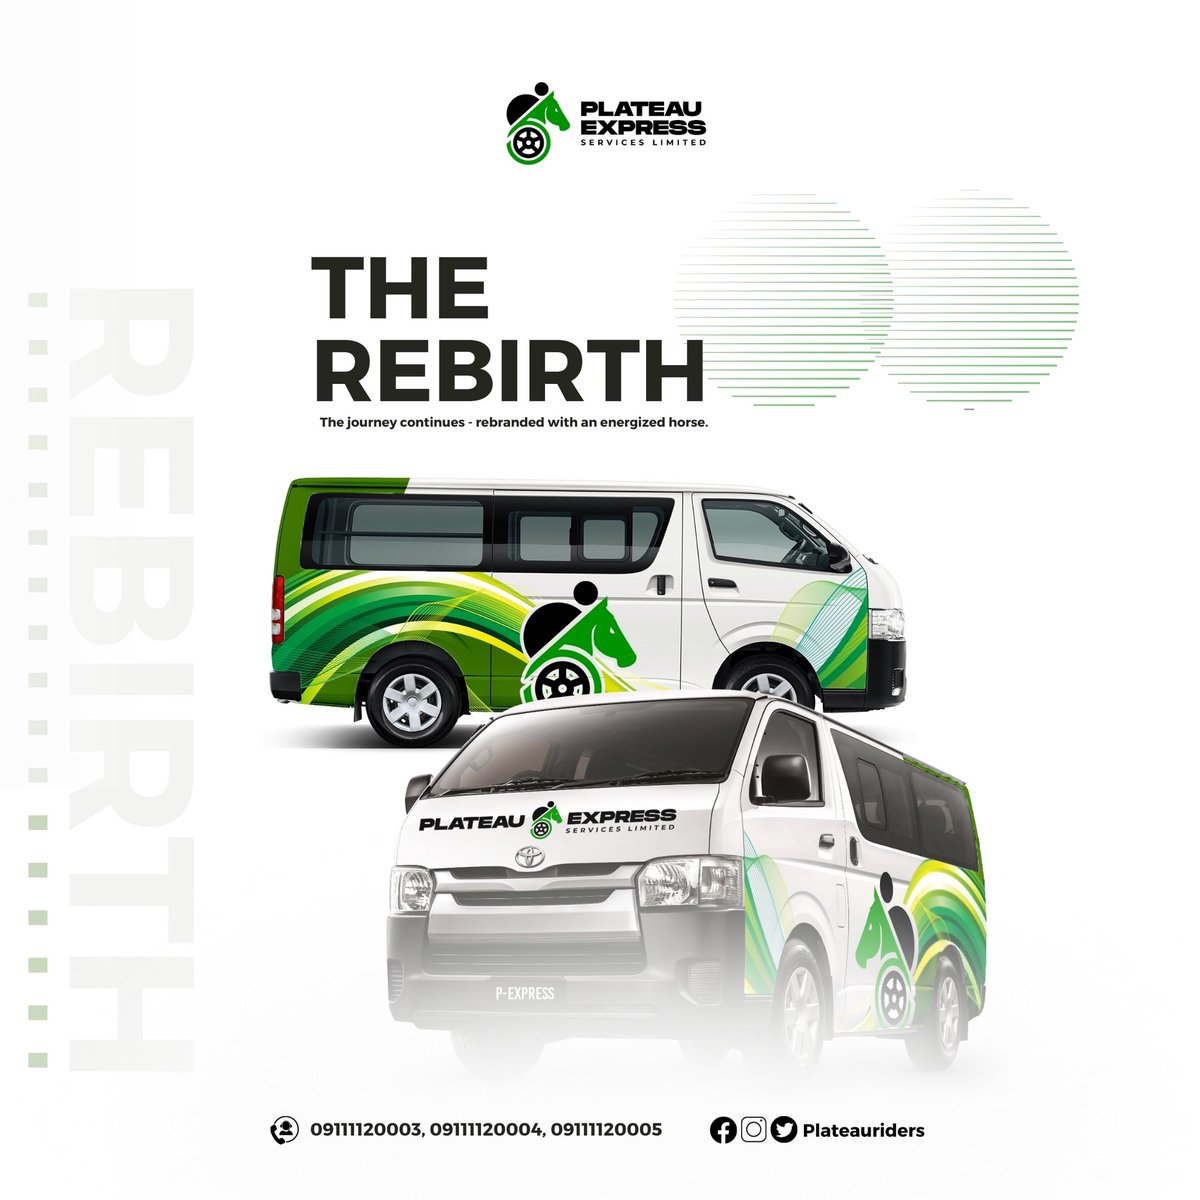 I'm pleased to announce the roll-out plan for @Plateauriders rebranding initiative, 'The Rebirth.' This comprehensive rebrand will bring an entirely new look and feel to our corporate identity and communications. Our fleets will be updated with this fresh new branding that